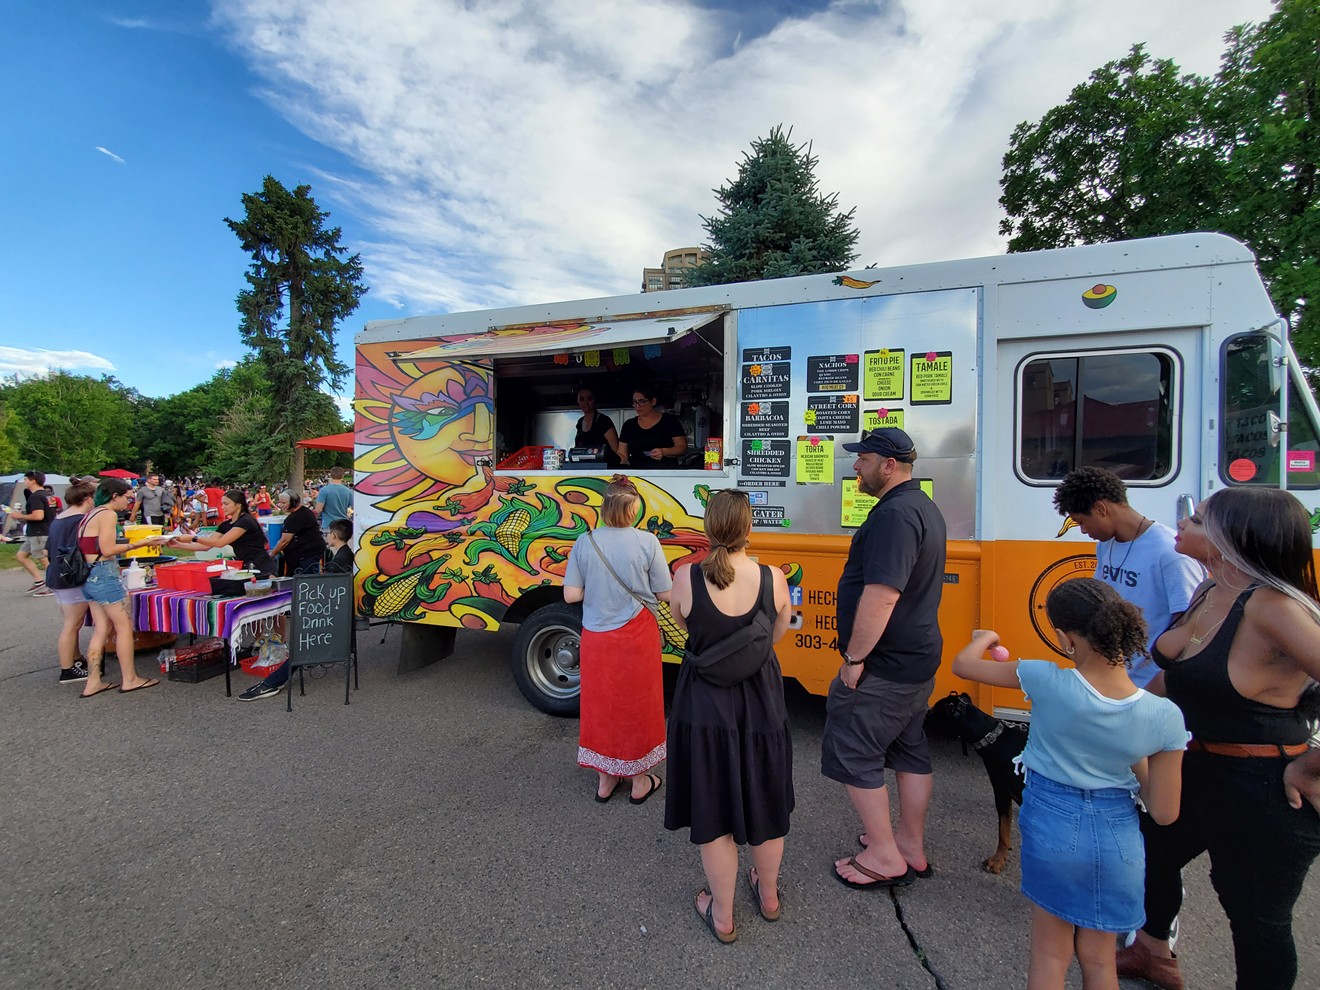 City Park Jazz's food truck lineup has expanded over the years.